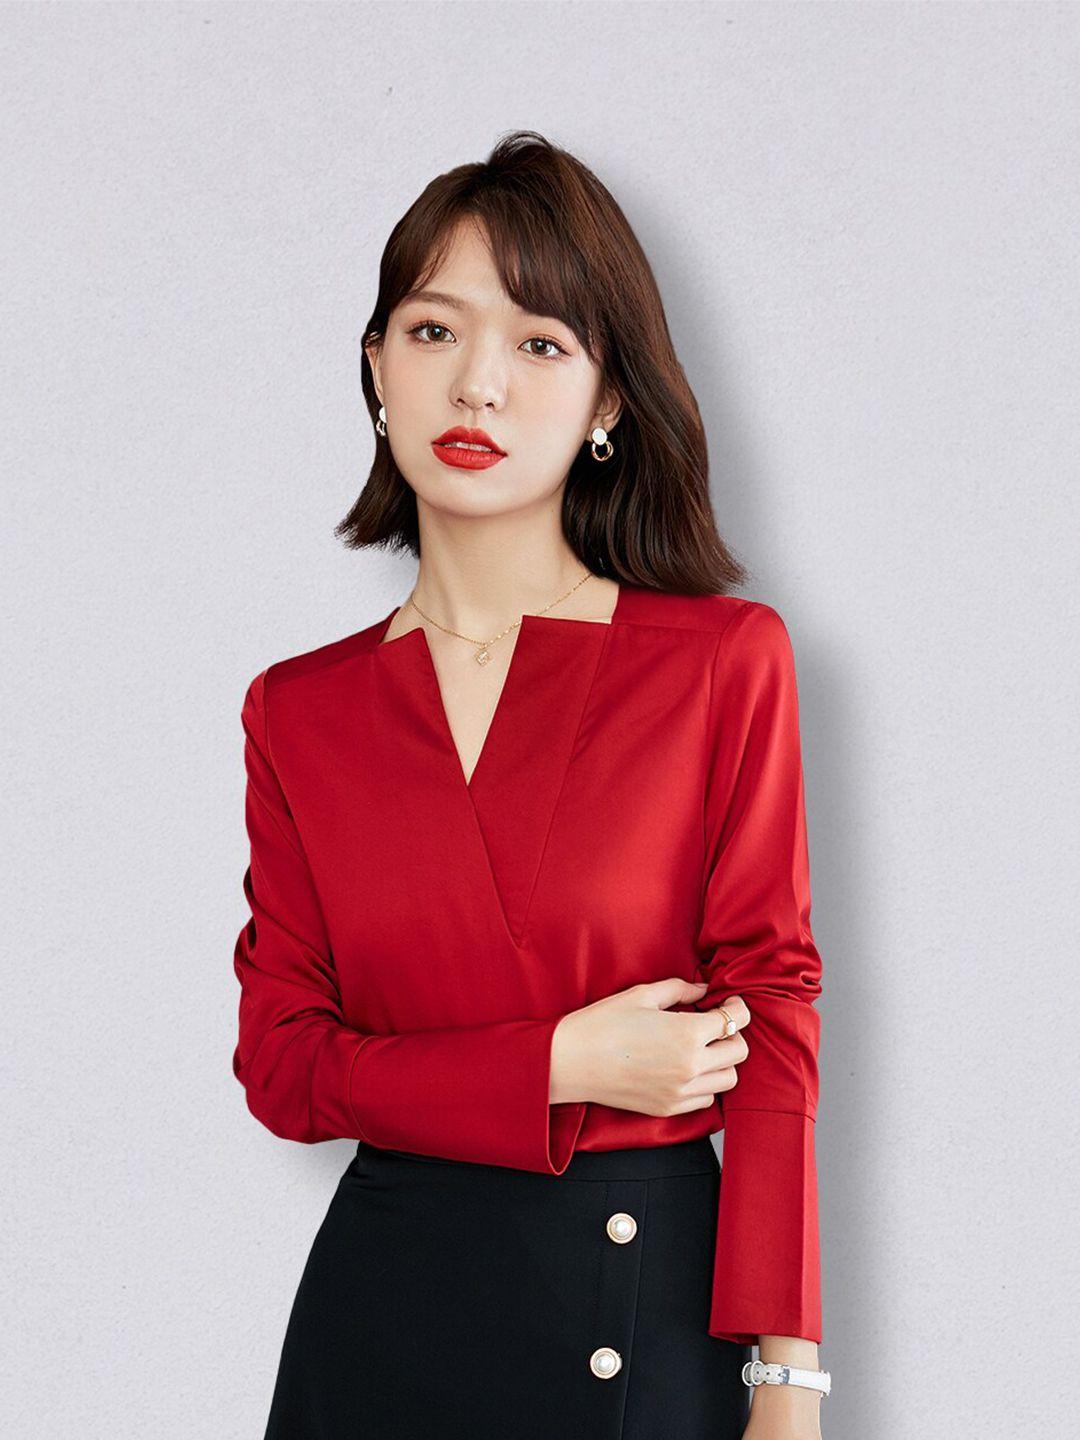 jc collection red v-neck shirt style top